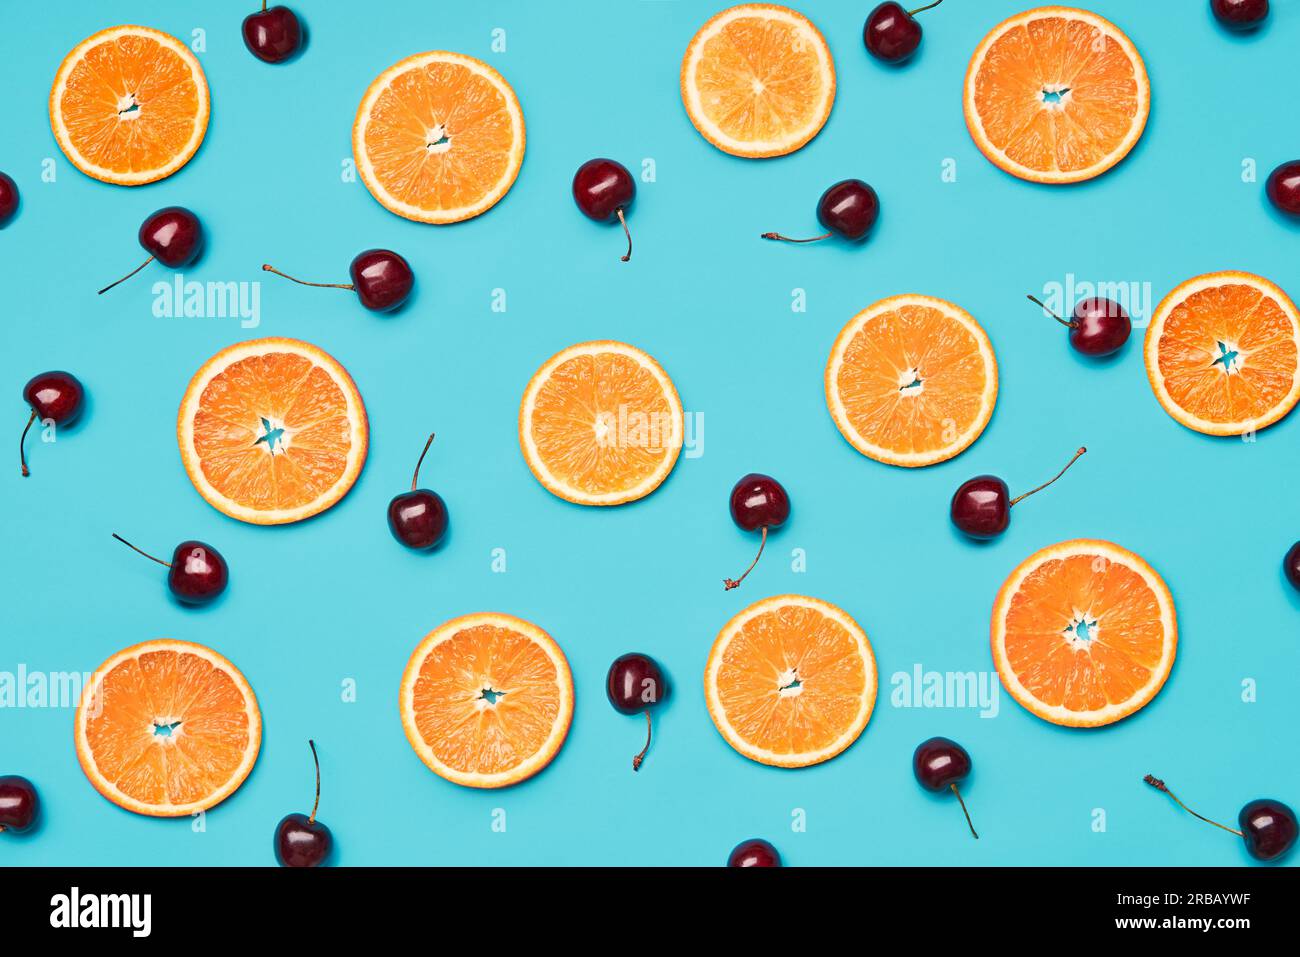 Orange slices and sweet cherries on blue background. Food wallpaper, summer, vgetarian concept Stock Photo